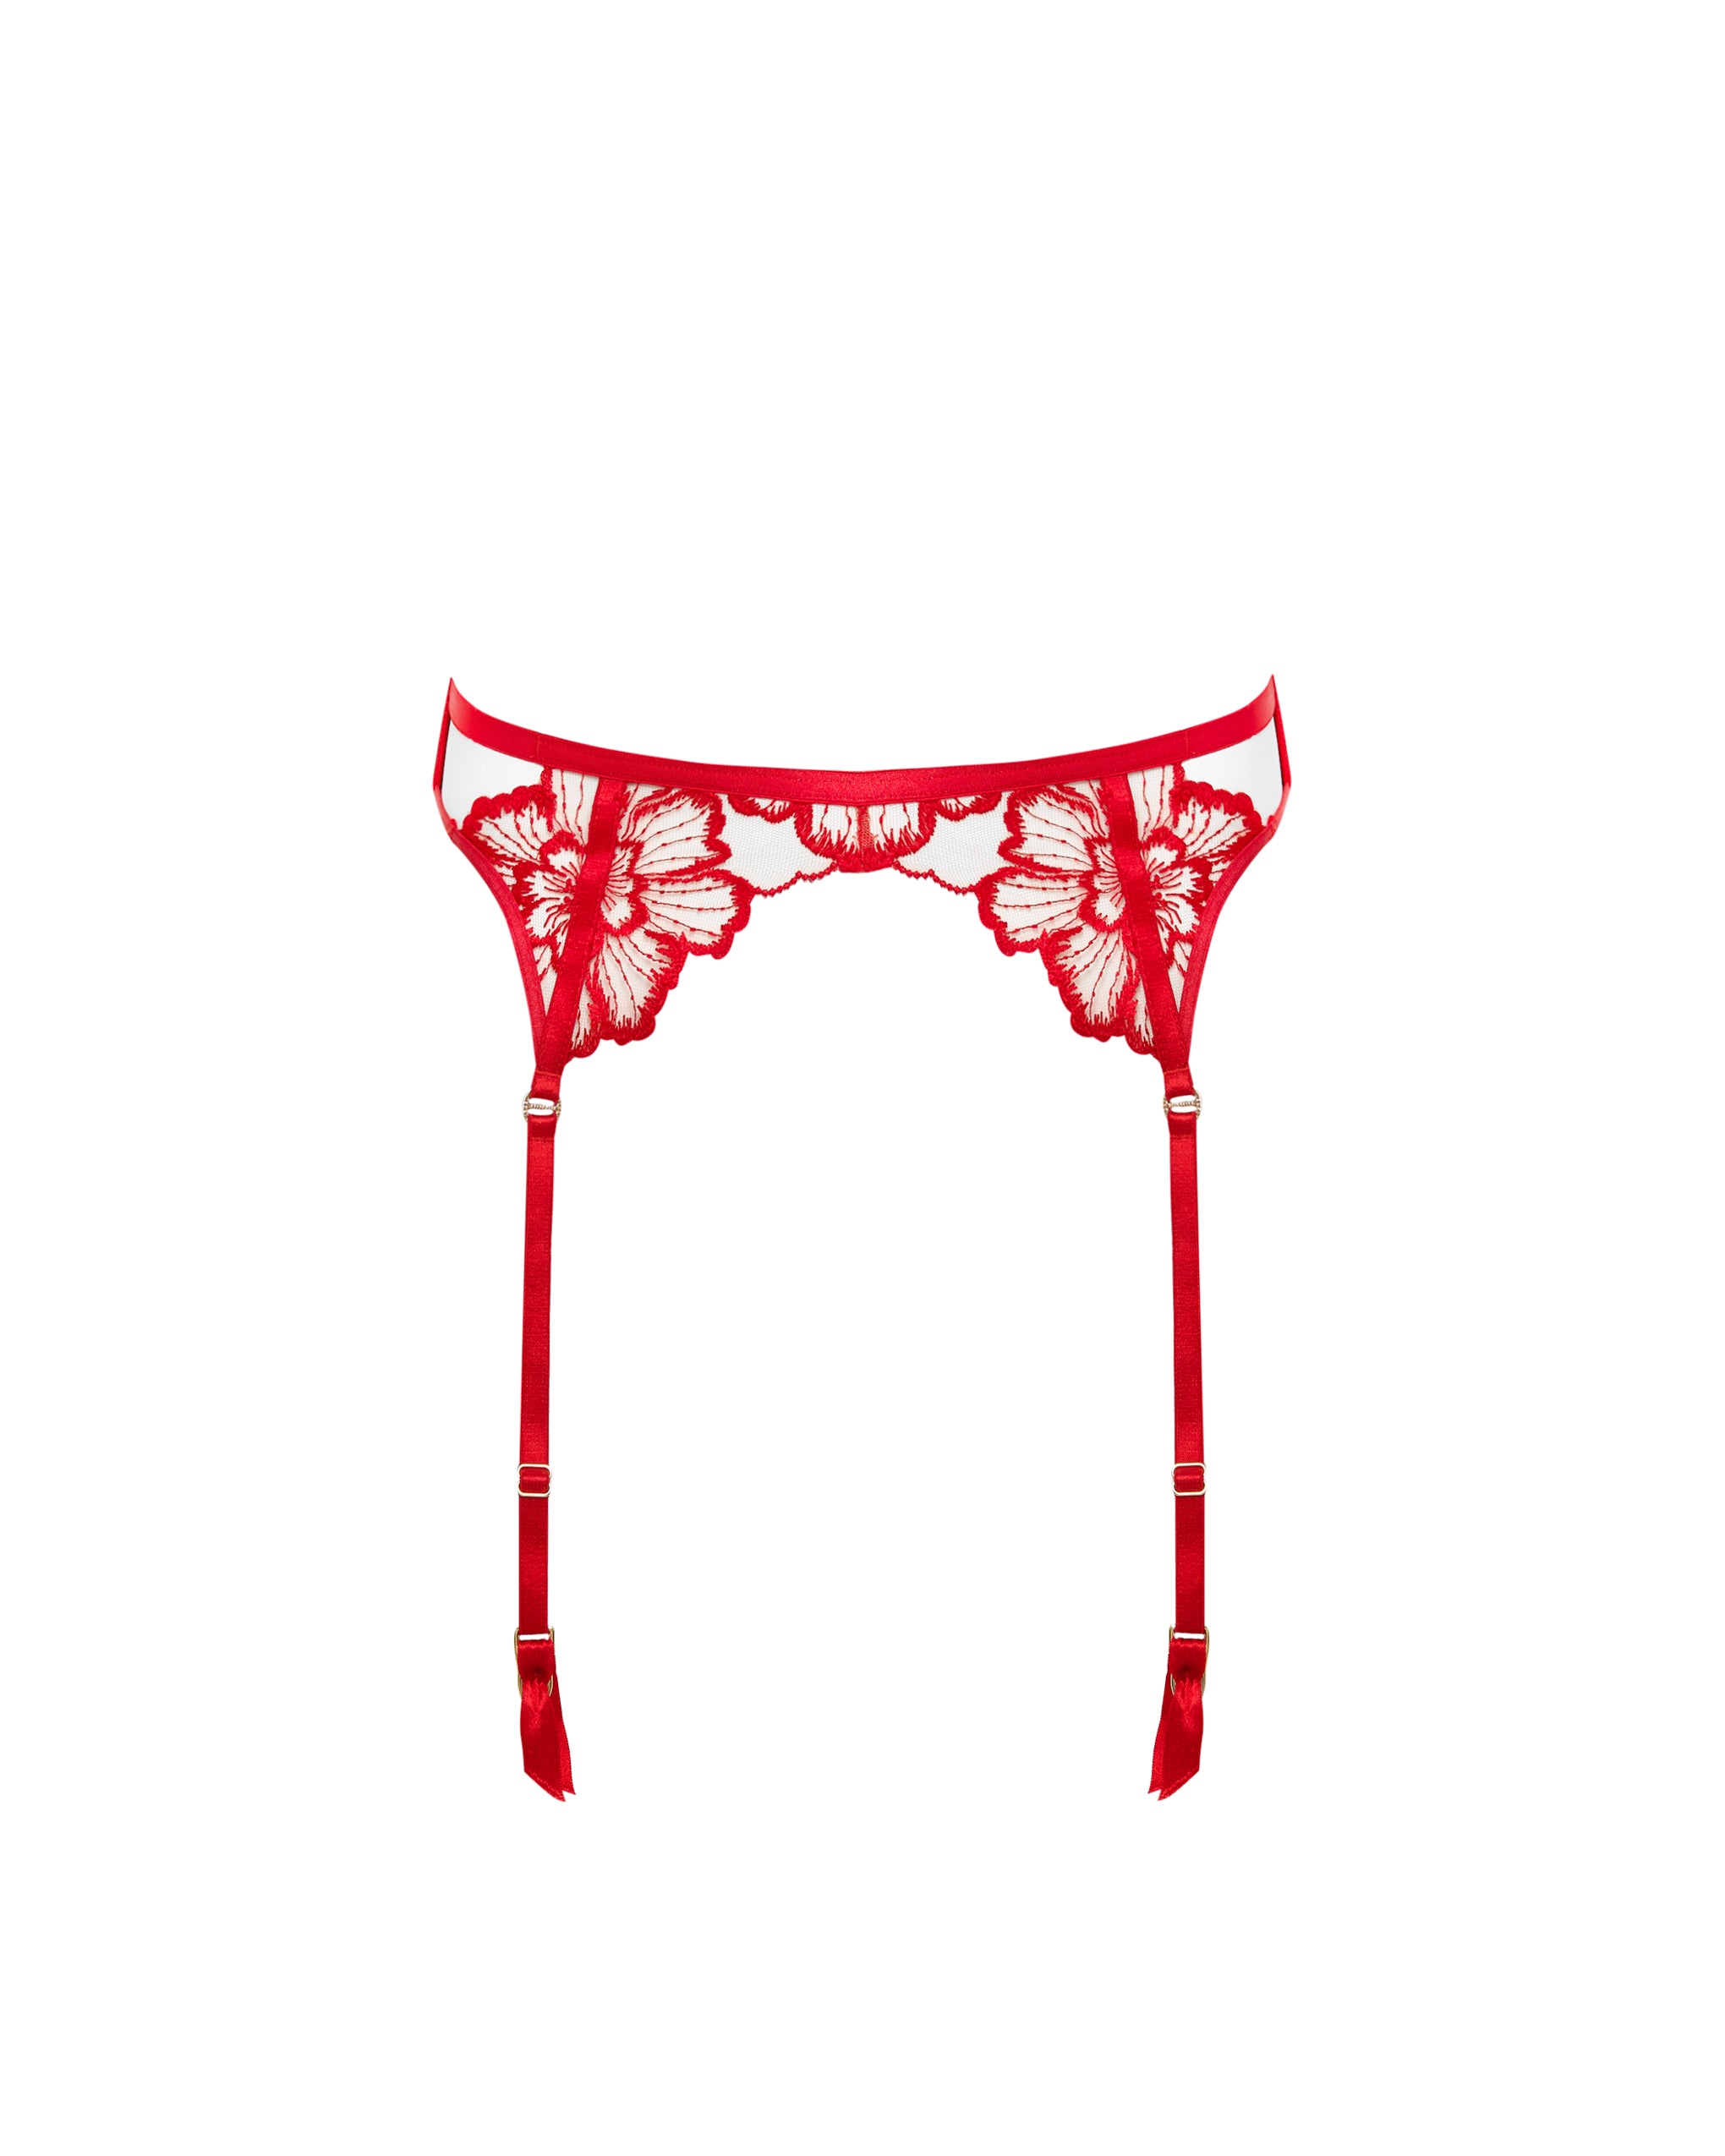 Bluebella Catalina Suspender Red/Sheer product